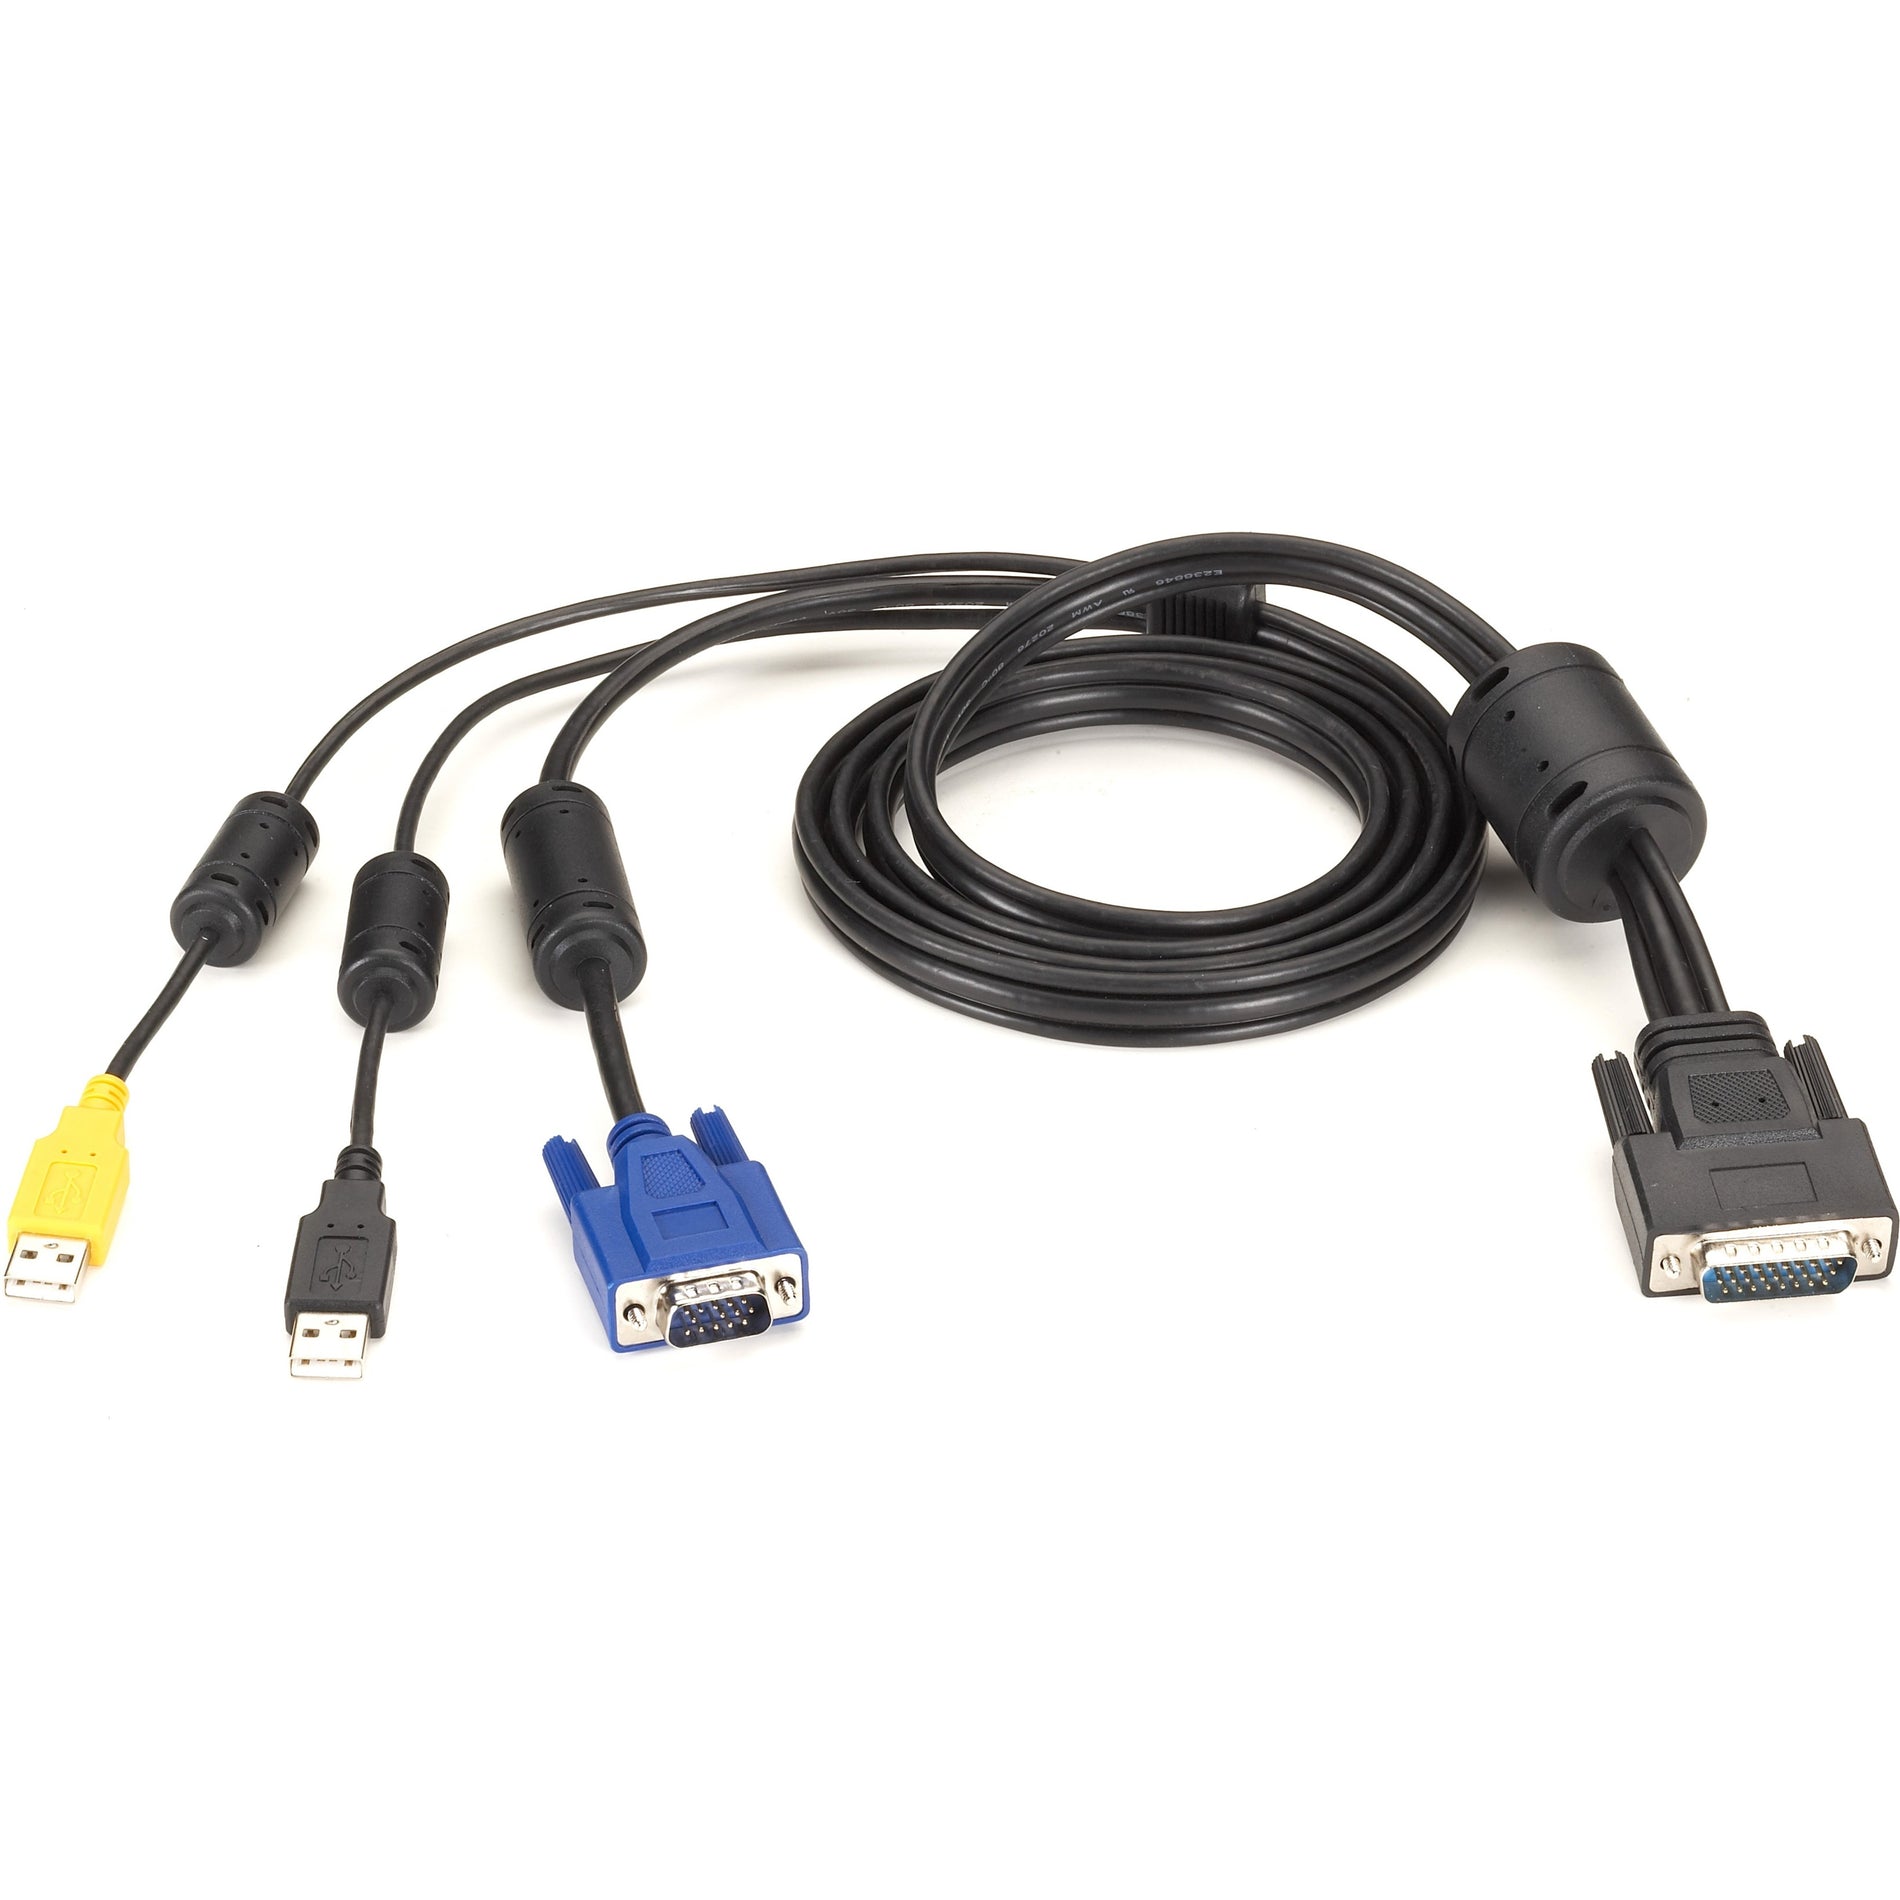 Black Box EHNSECURE3-0006 KVM Switch Cable - VGA, USB, CAC USB to HD26, 6 ft